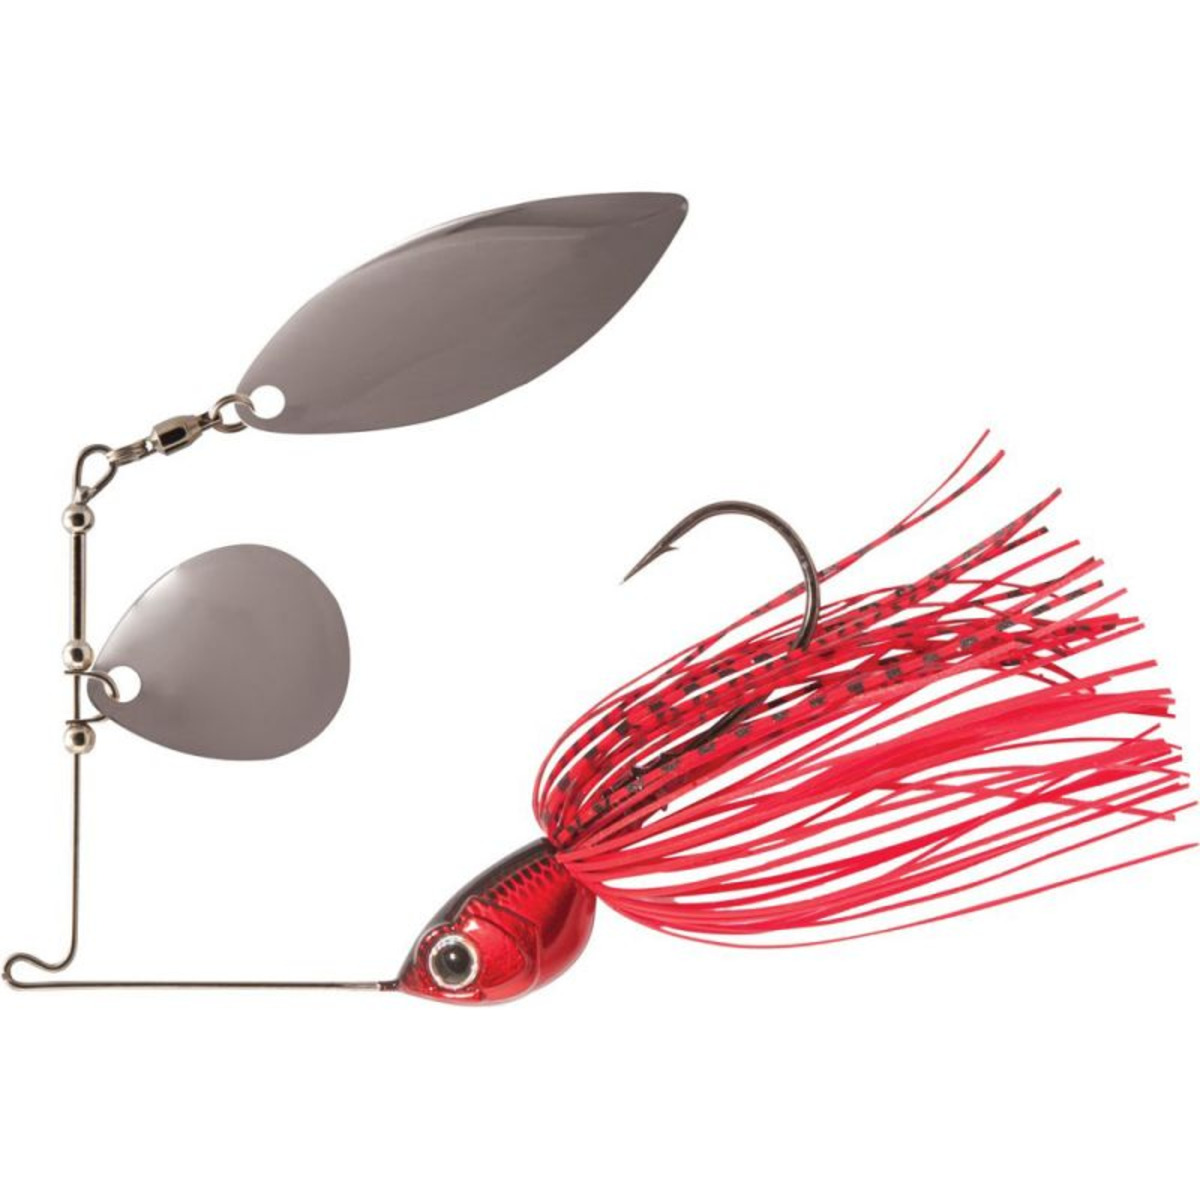 Rapture Sharp Spin Willow Colorado - 14.0 g - Red Hot